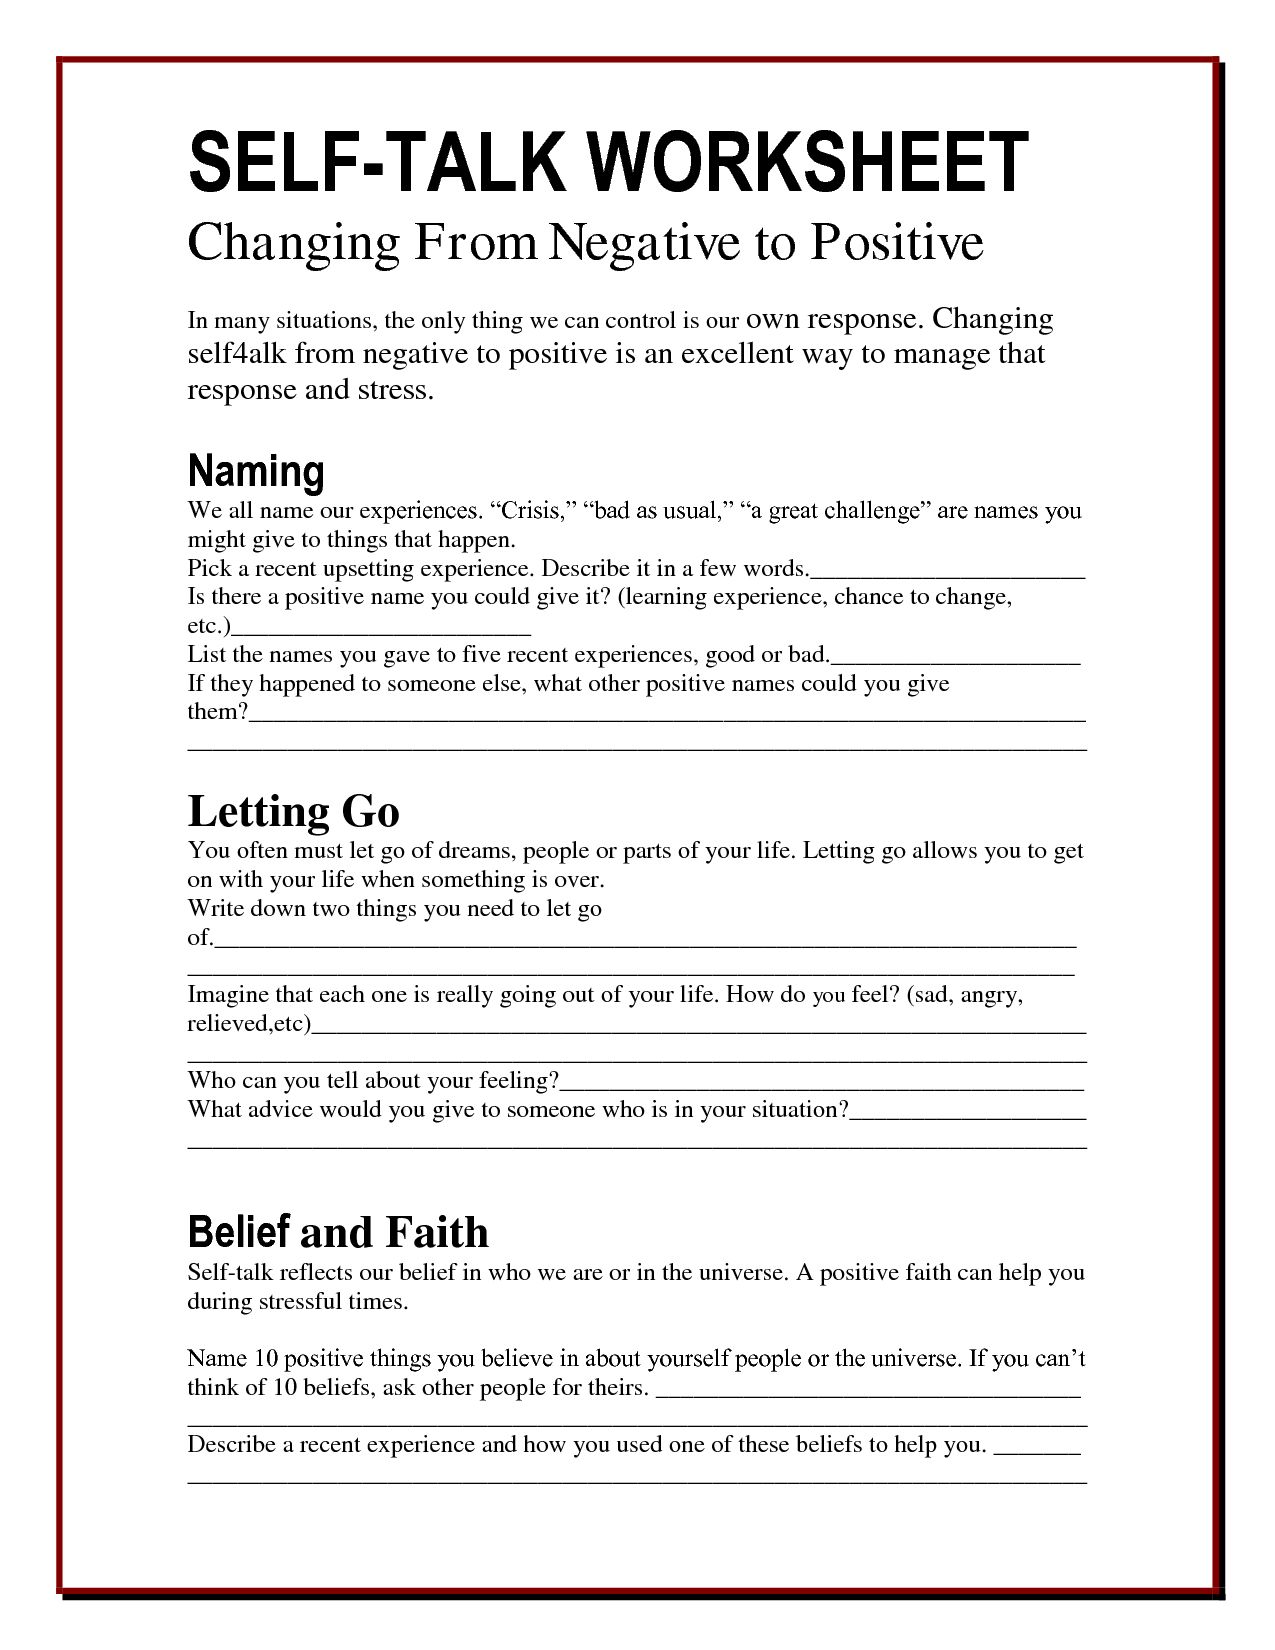 Printables Mental Health Worksheets introduction to anxiety preview counseling pinterest image from httpimg docstoccdn comthumborig worksheets